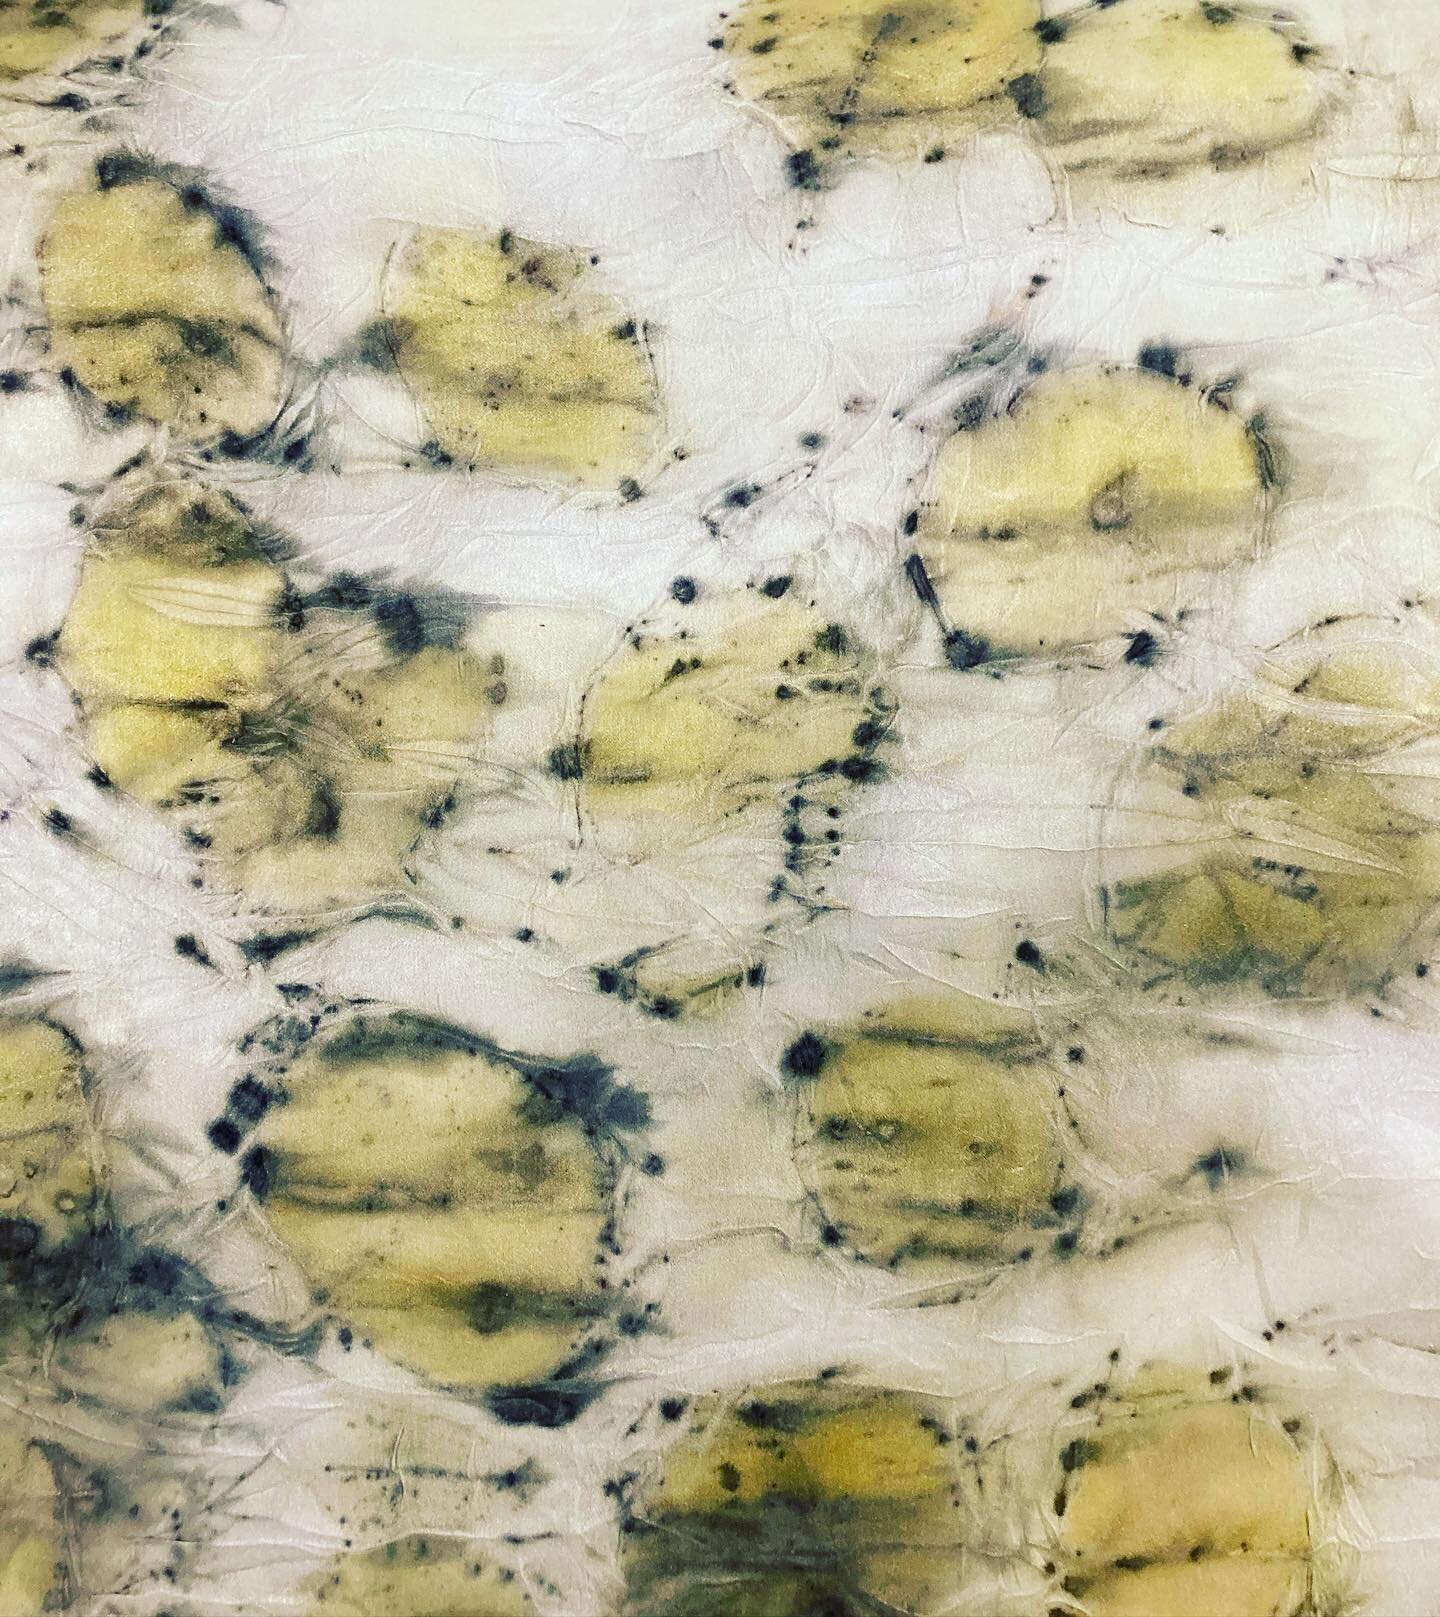 Eucalyptus + Silk ✨ 
Im so enjoying learning the beauty of natural dyeing and eco-printing. This process is just as spontaneous and intuitive as my painting practice and I simply love it!

#textiles #ecoprinting #naturaldyeing #silk #mothernature #in